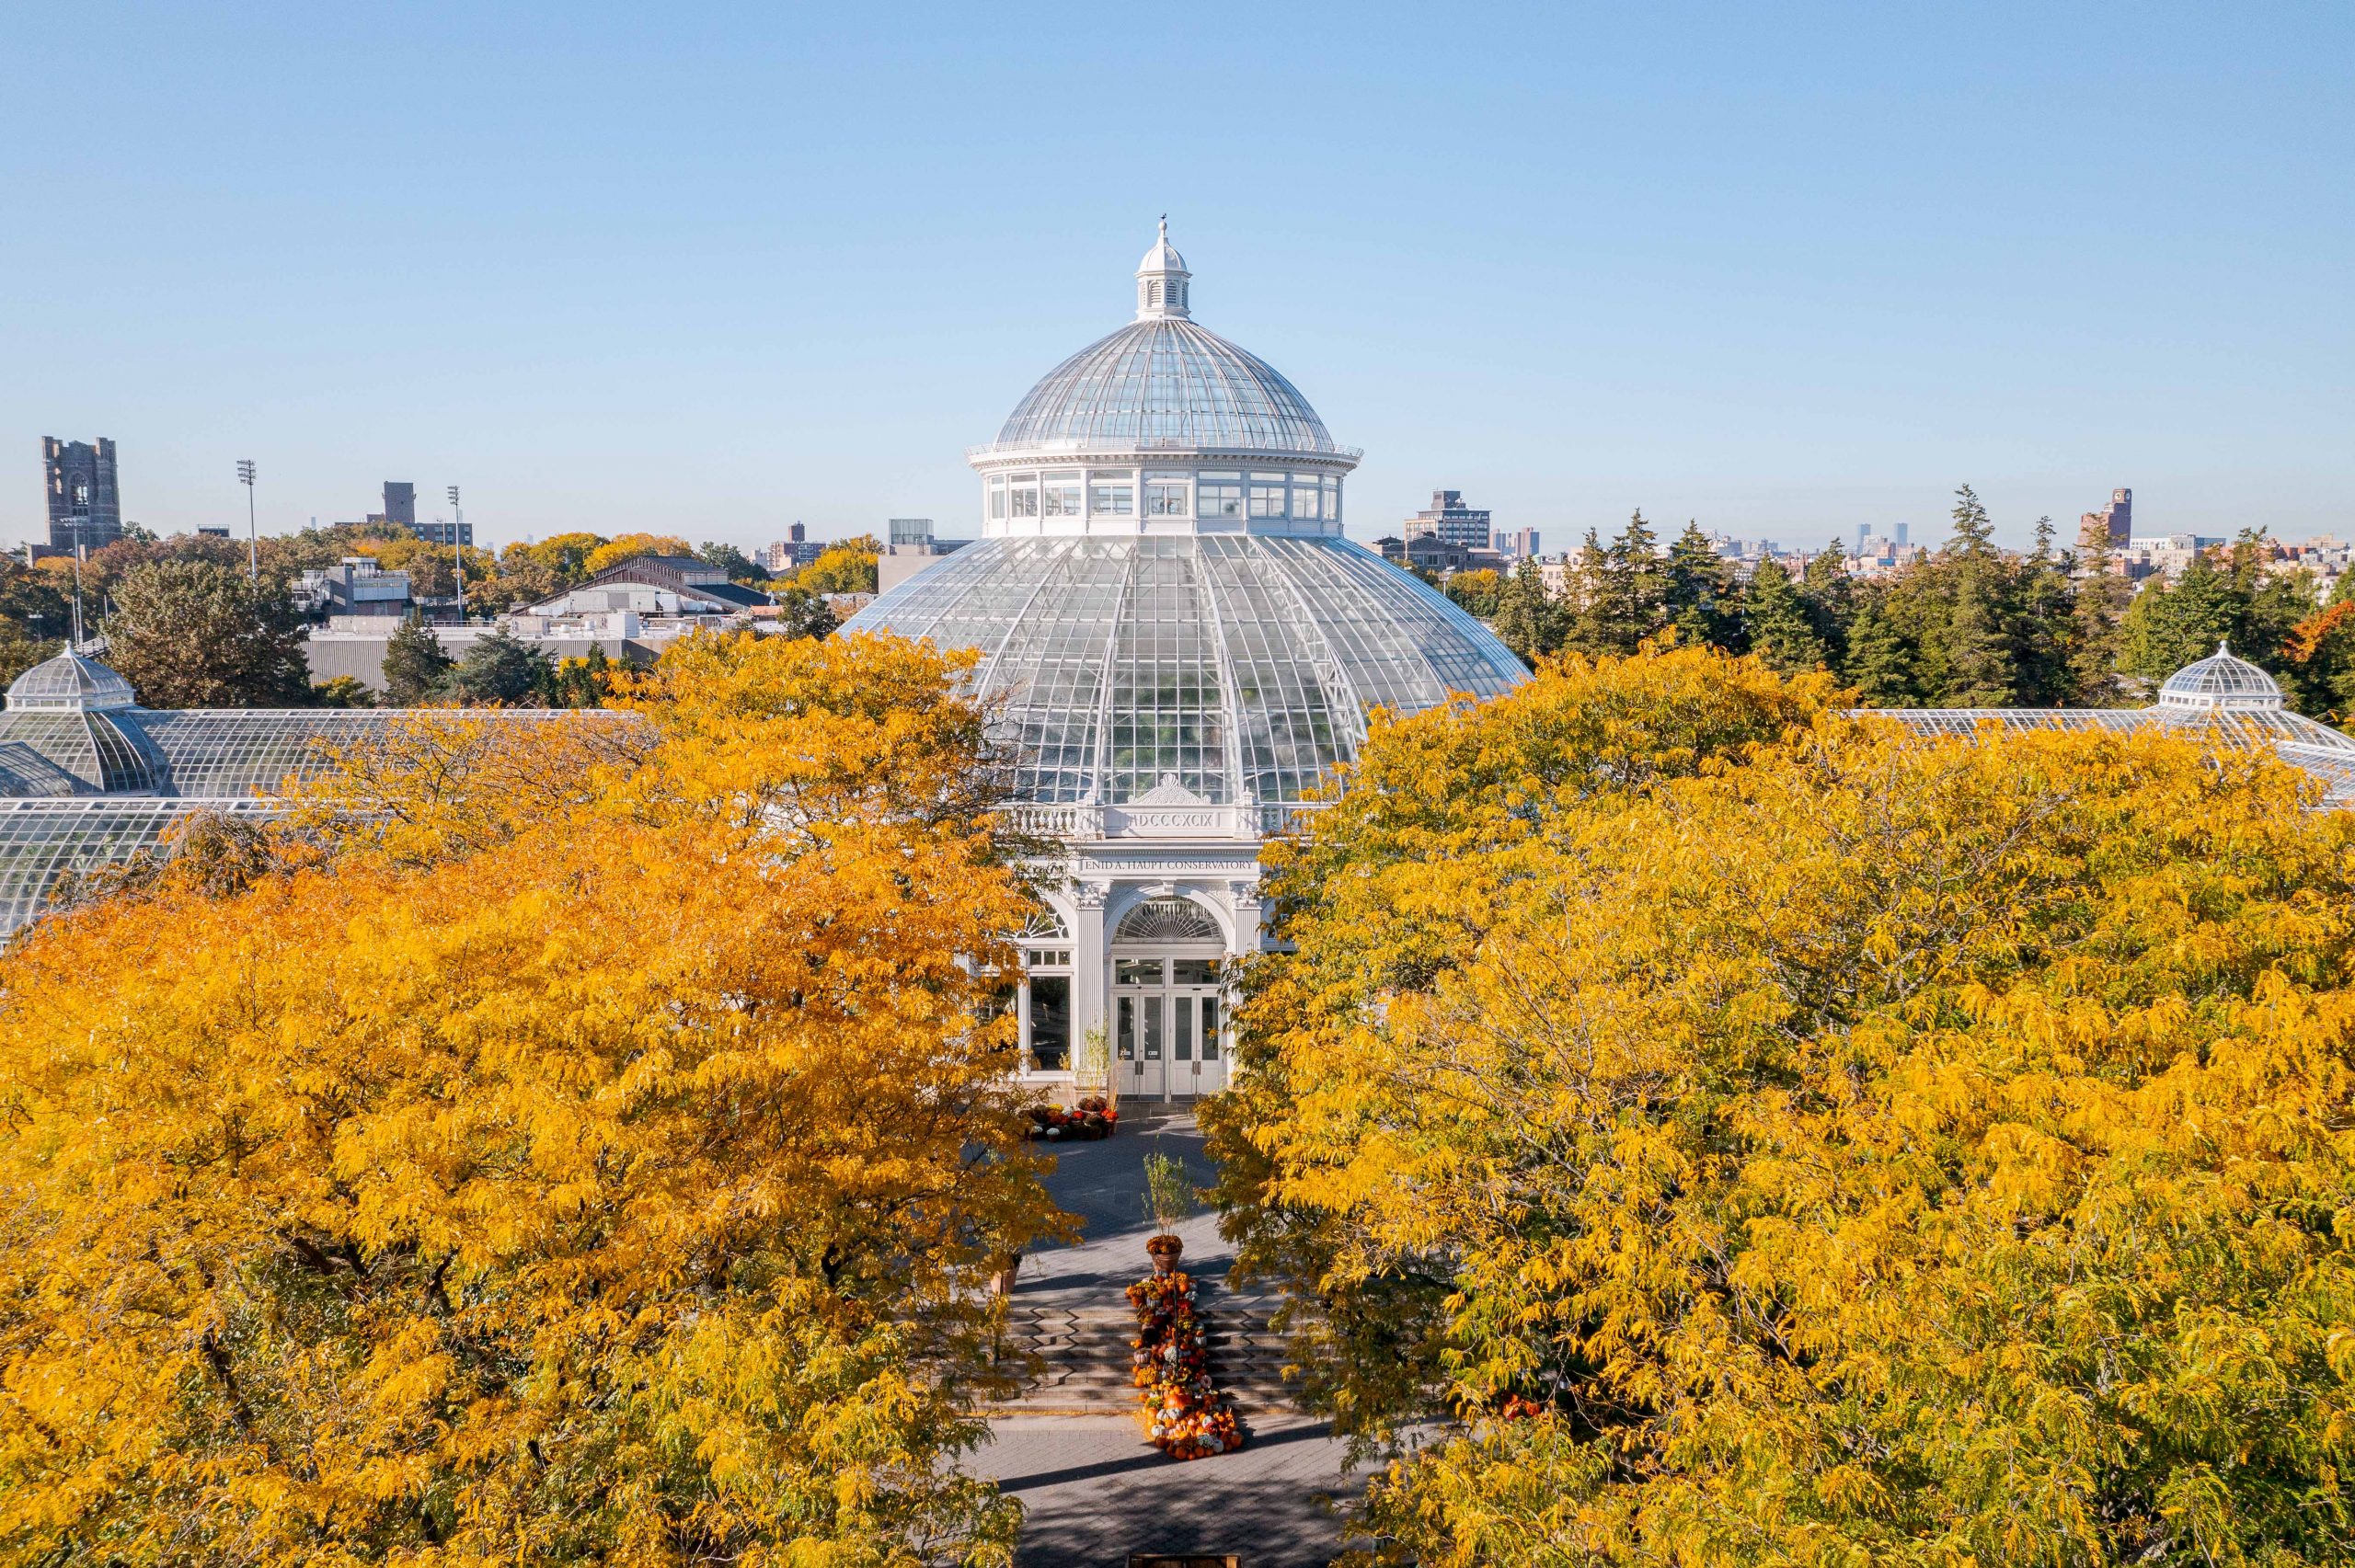 A sunny Conservatory dome surrounded by yellow tree foliage